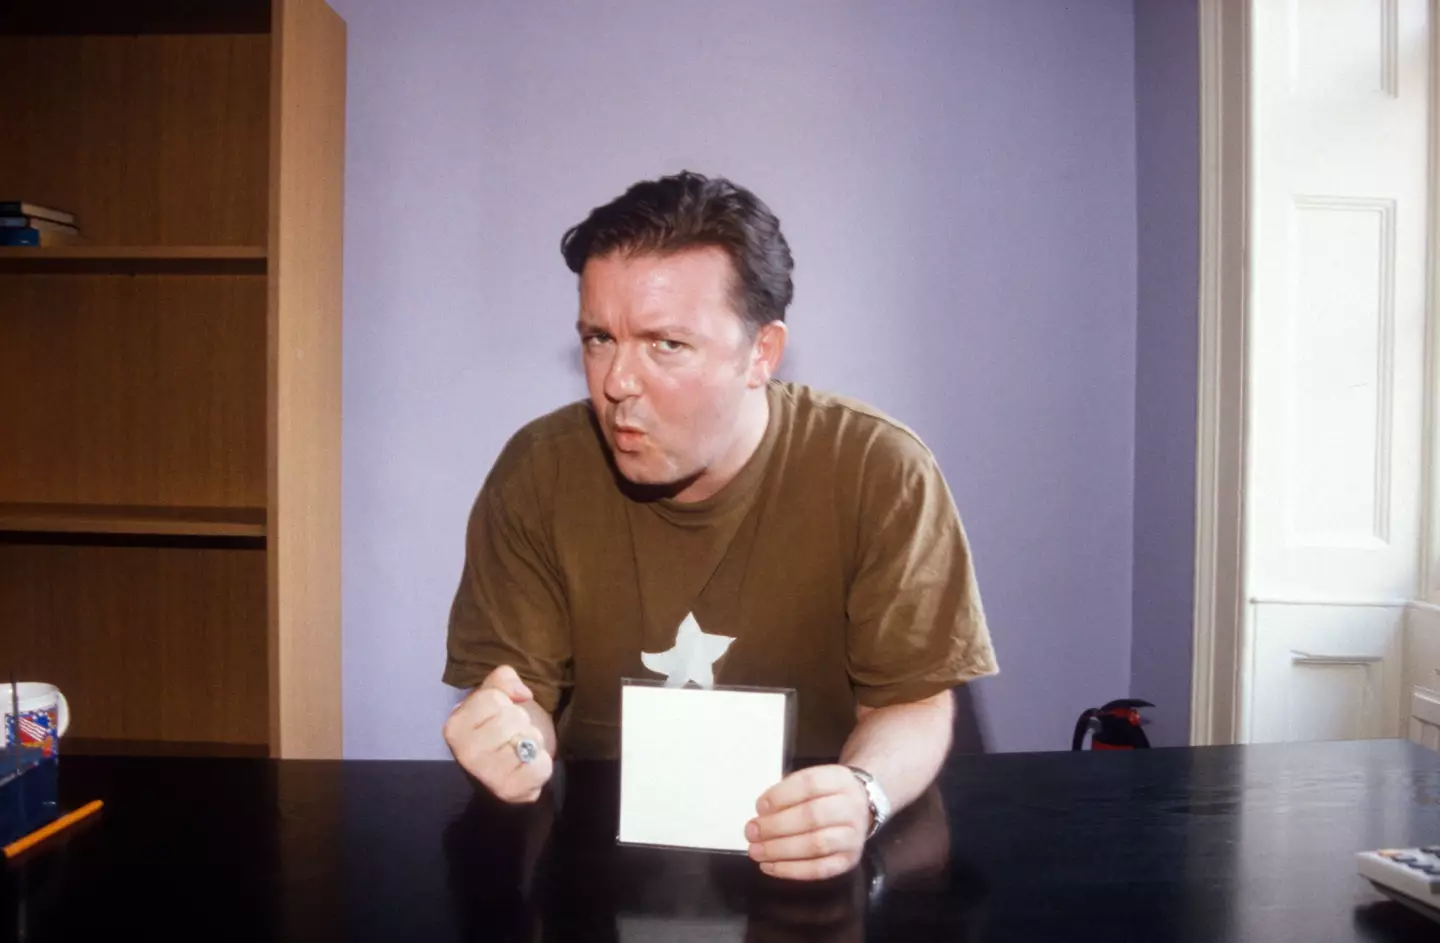 Ricky Gervais photographed 29th August 2000, London, England.